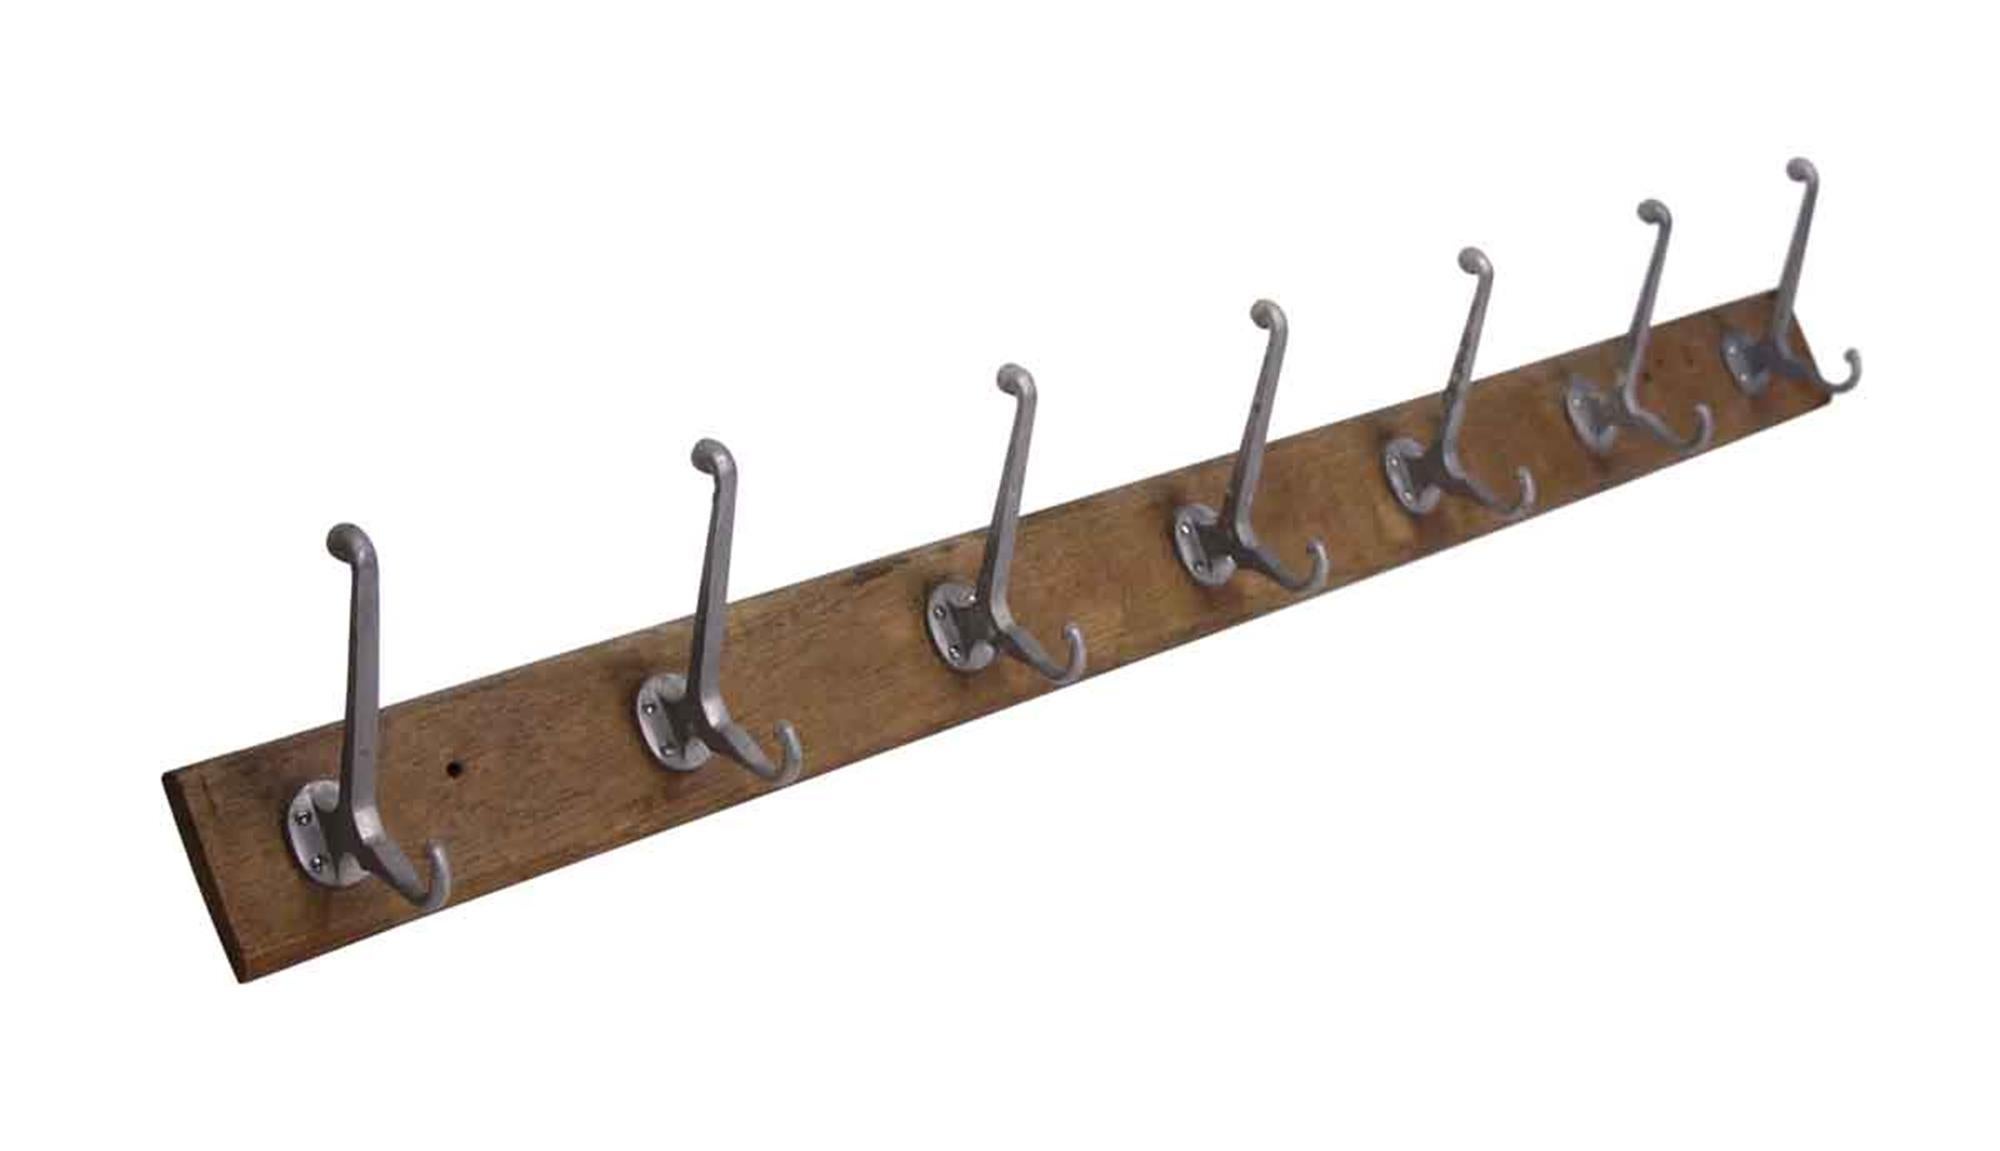 1990s Belgium wall mounted coat rack with seven hooks on a wooden plank. This can be seen at our 400 Gilligan St location in Scranton, PA.